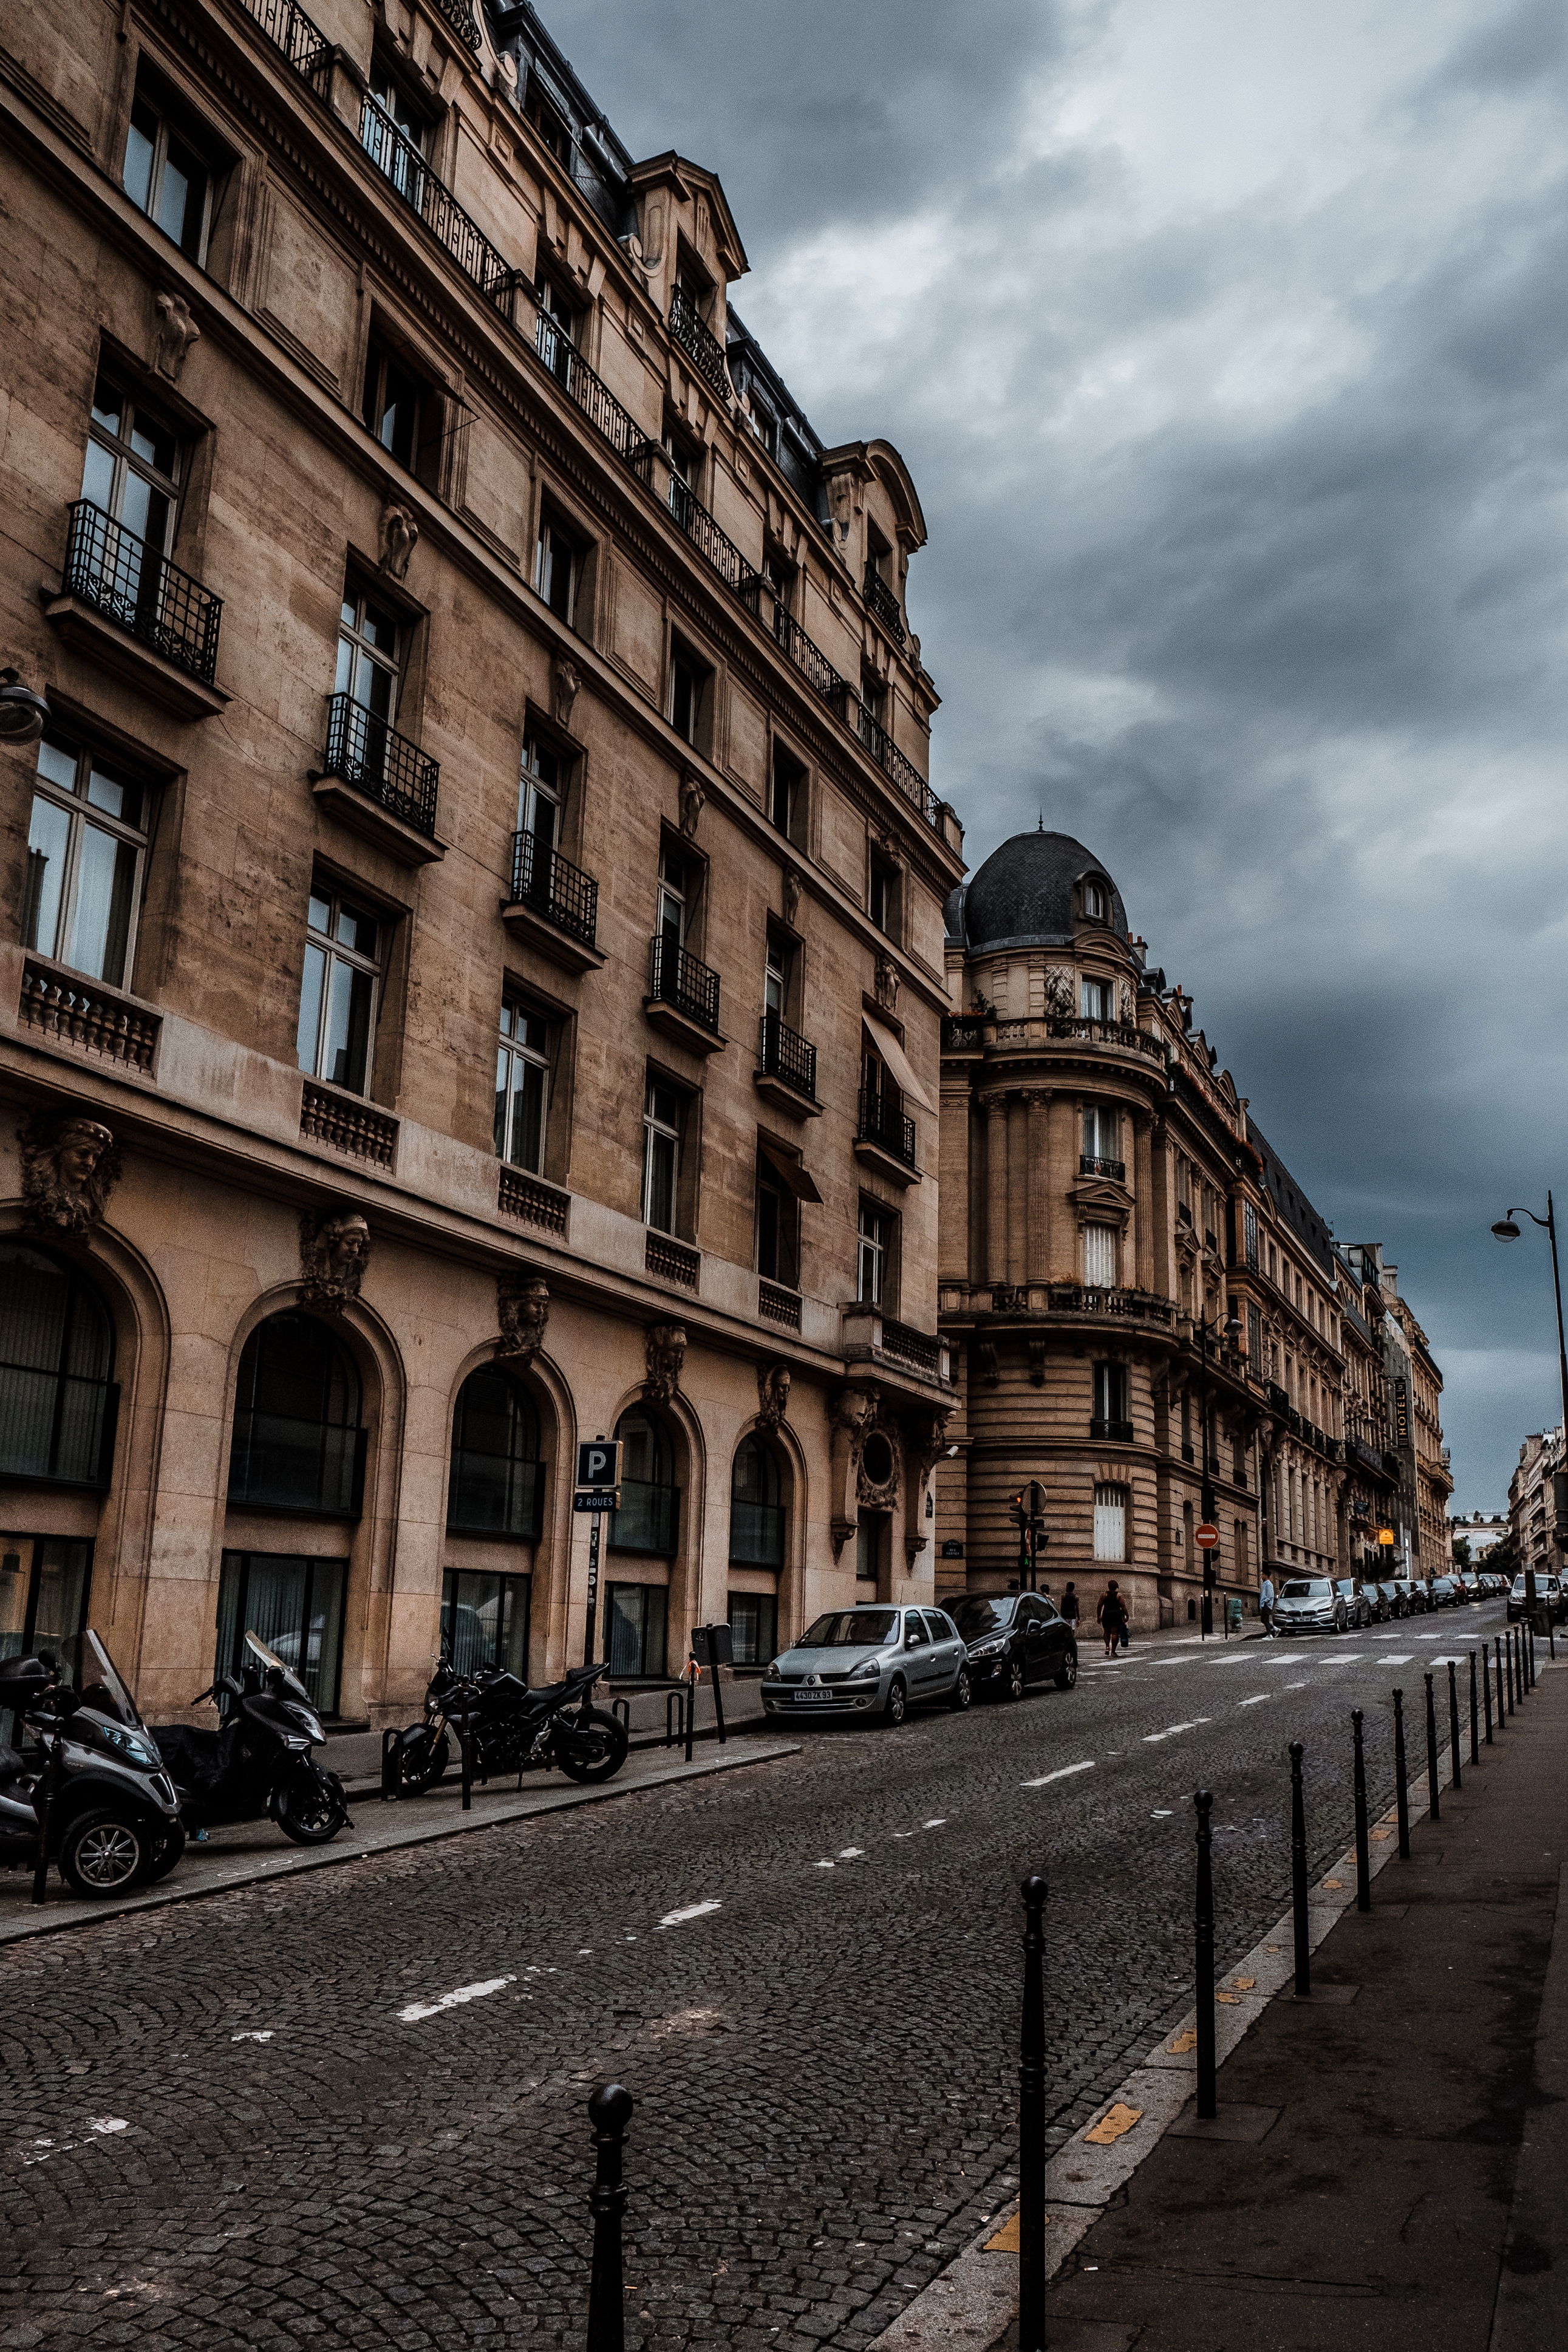 cars, architecture, street, france, paris, cities, motorcycles, city, building